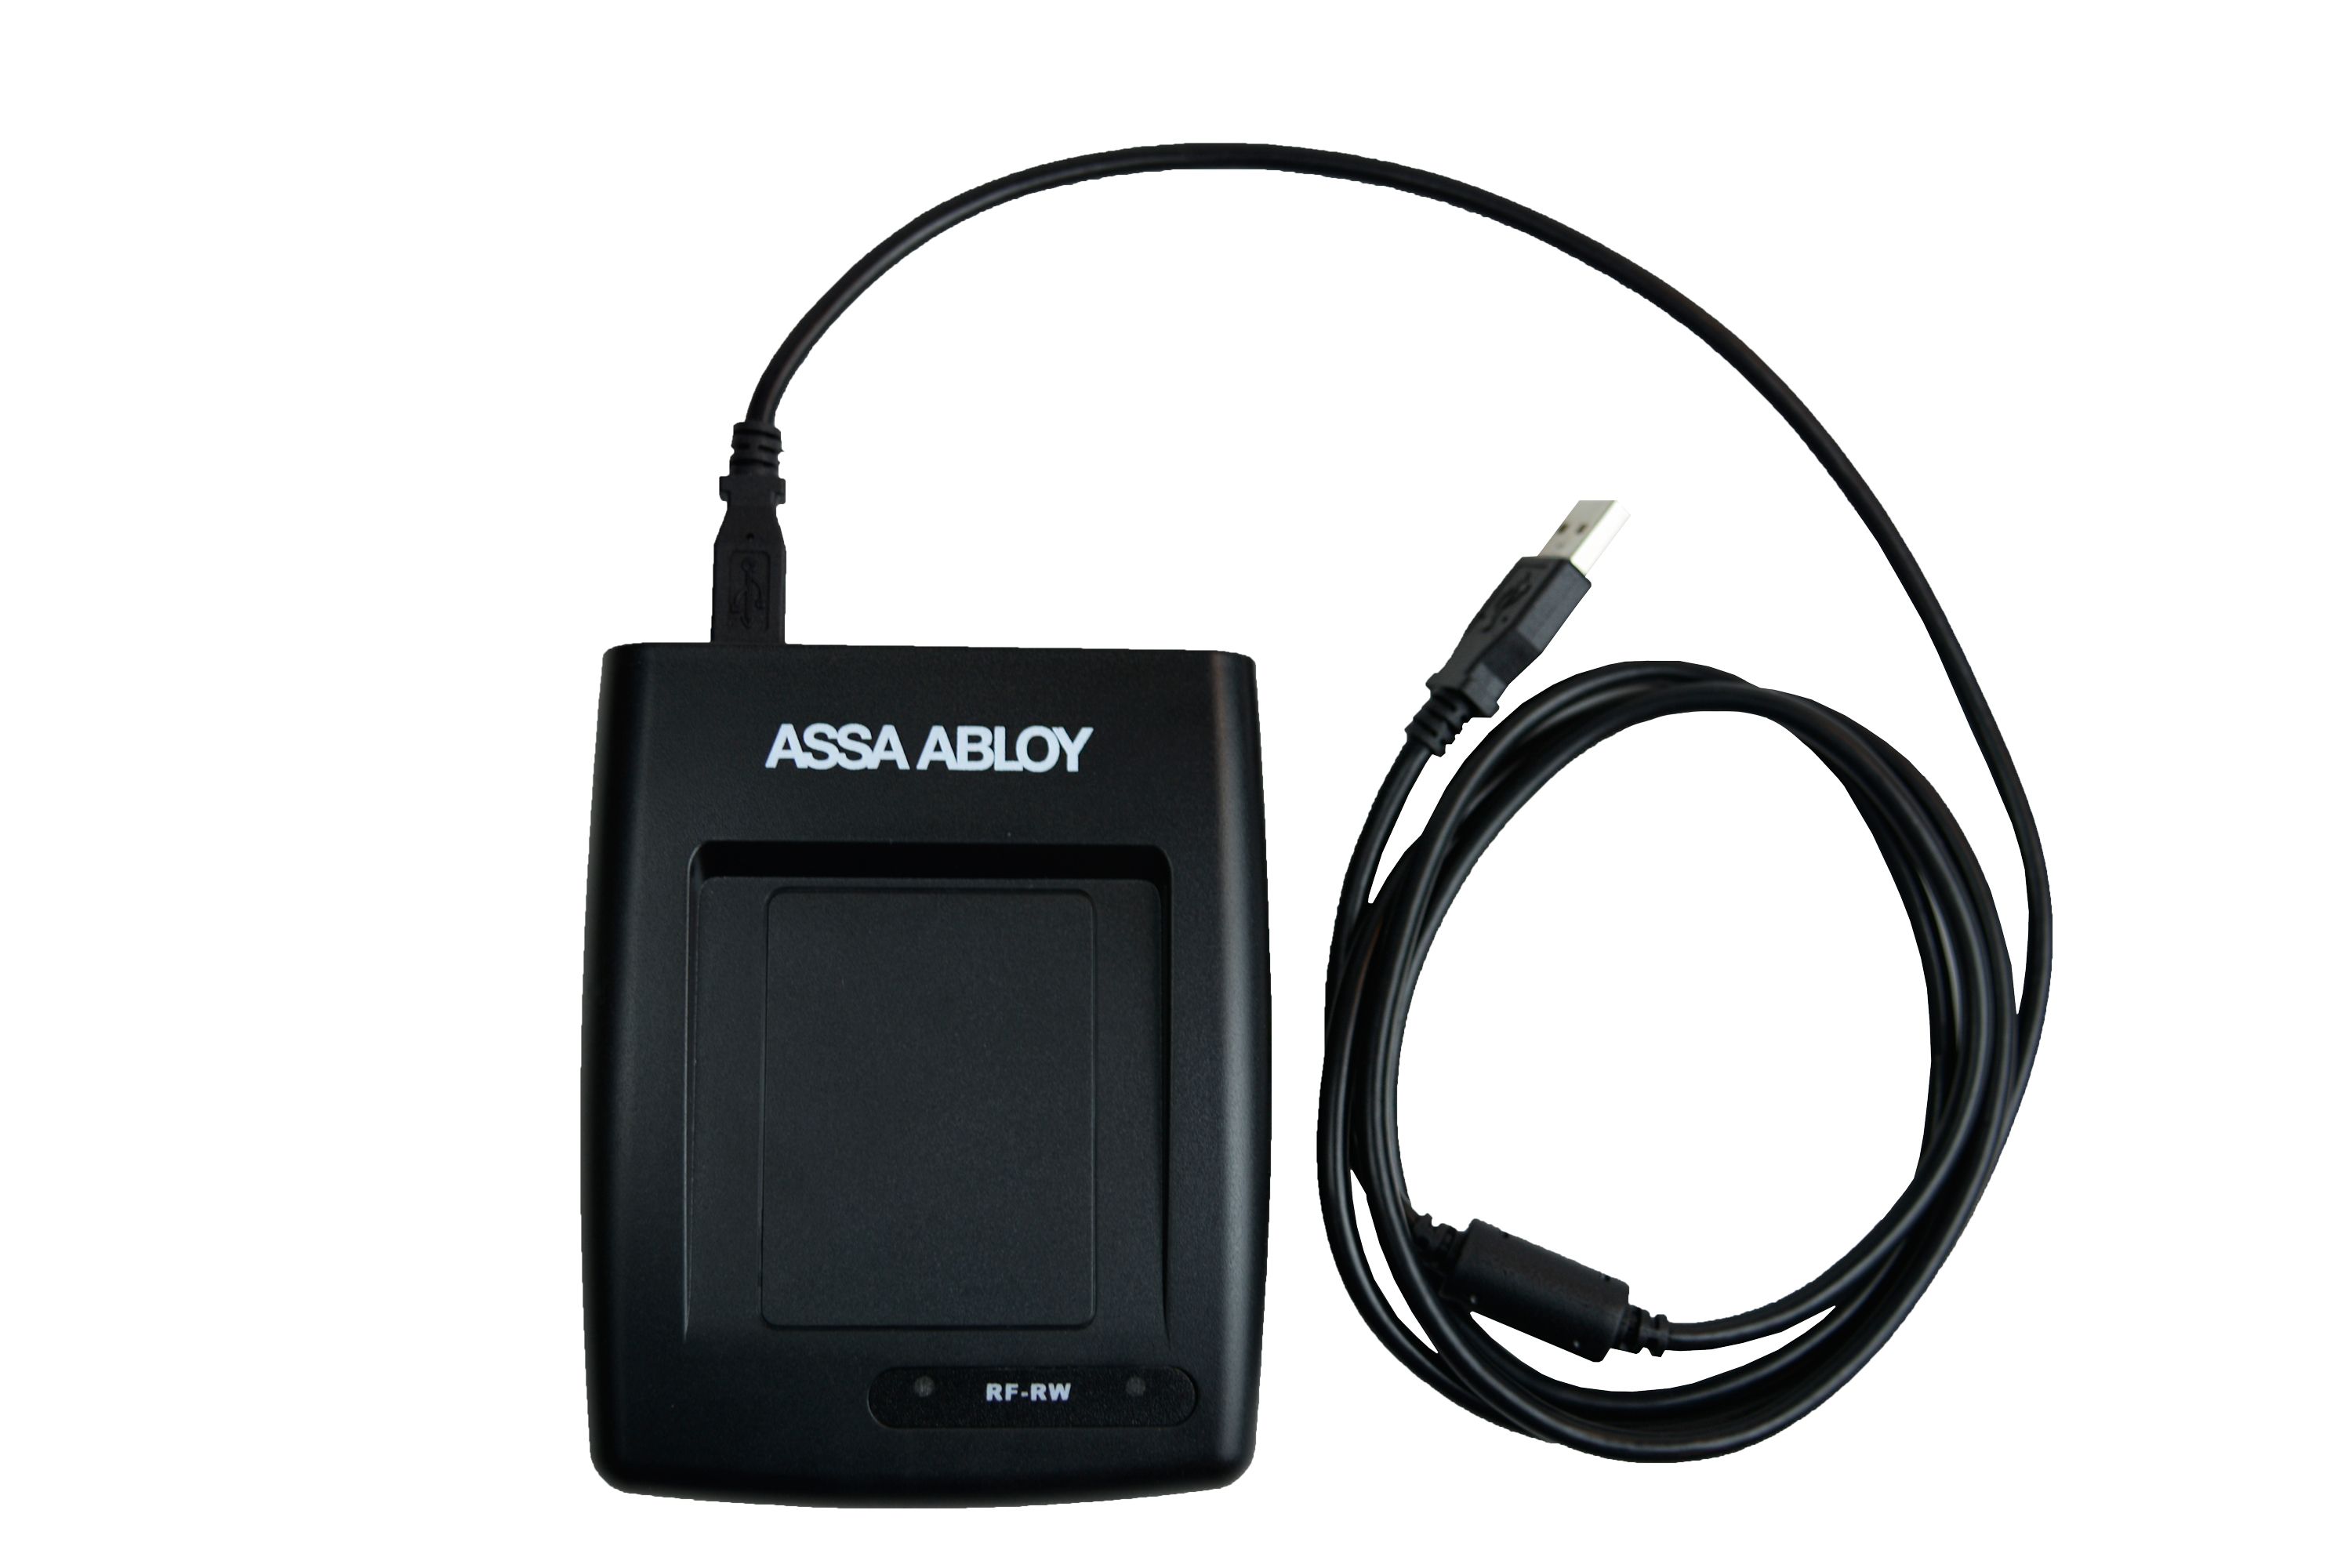 ASSA INTEGRAL ACCESS MANAGEMENT USB CARD ENCODER BLACK ABS WIN BASED MIFARE 13.56MHz 125D98Wx31H (MM) (DOESN?T DO SPECIAL IC CARDS)